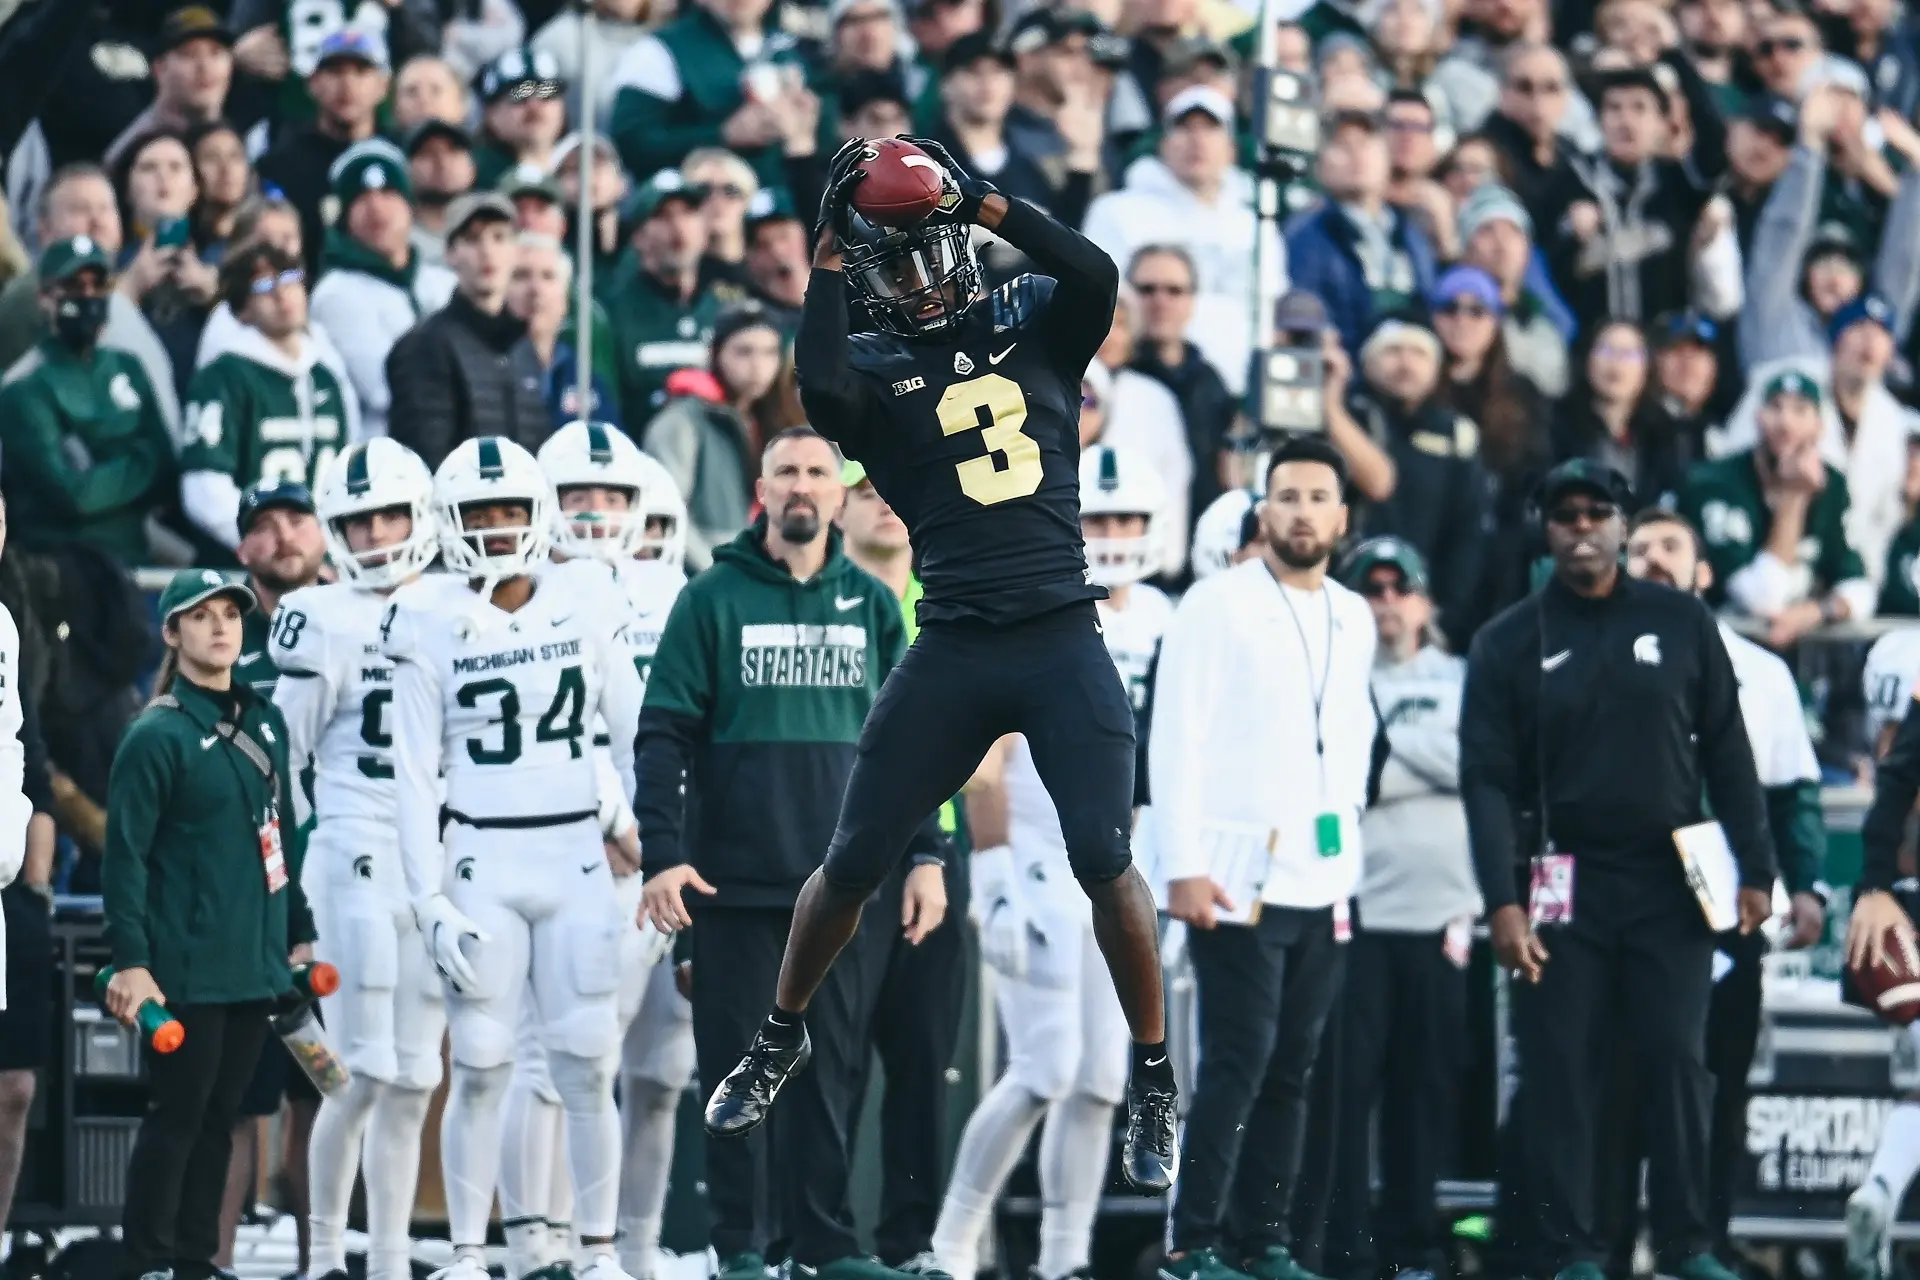 Purdue Football upset Michigan State in college football